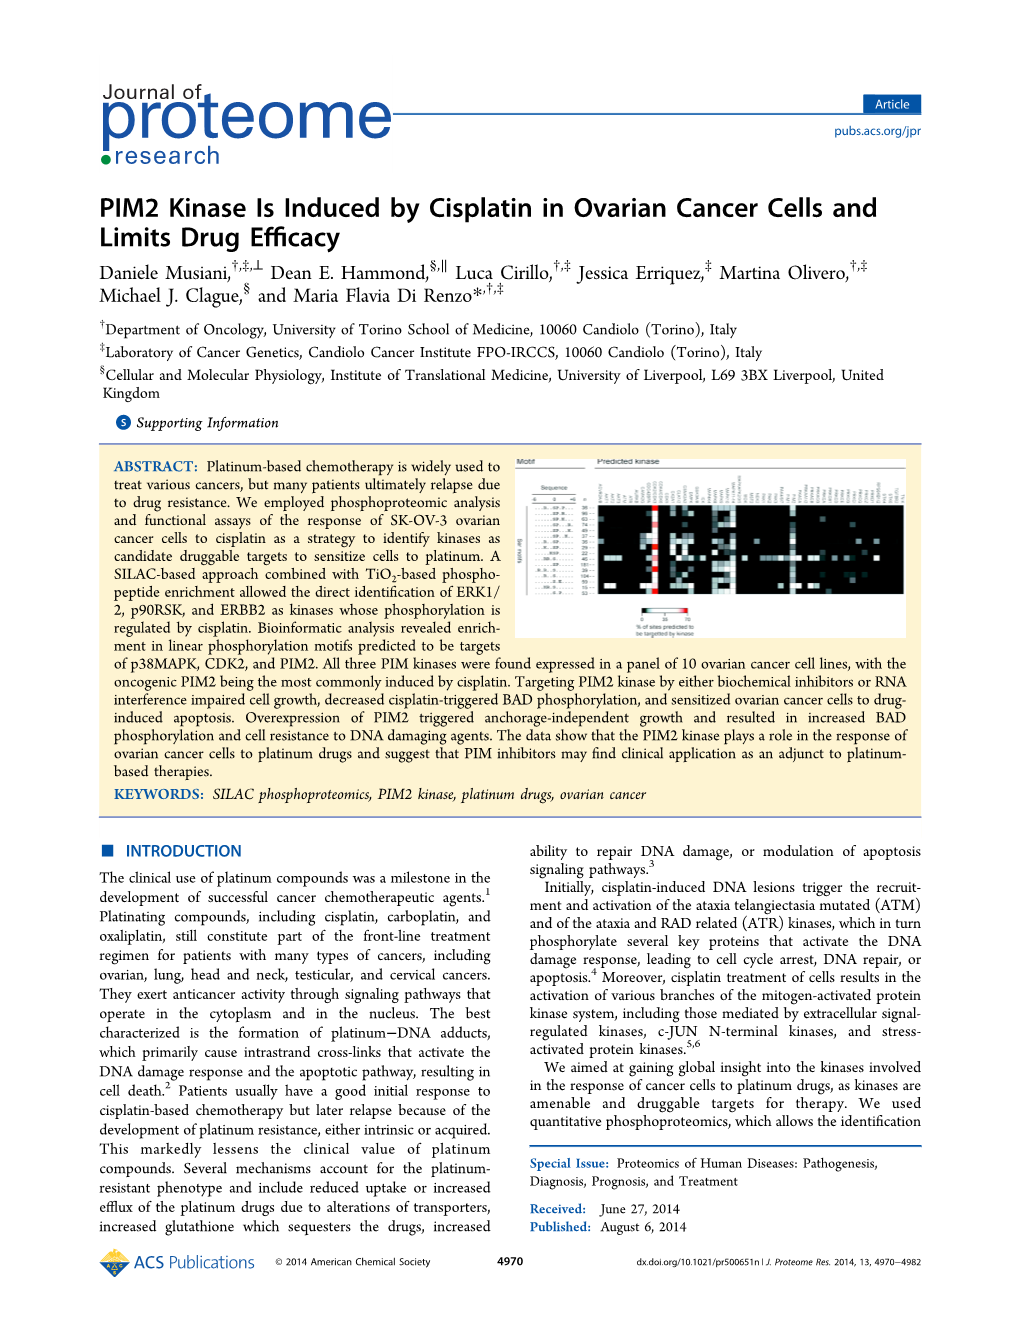 PIM2 Kinase Is Induced by Cisplatin in Ovarian Cancer Cells and Limits Drug Eﬃcacy † ‡ ⊥ § ∥ † ‡ ‡ † ‡ Daniele Musiani, , , Dean E